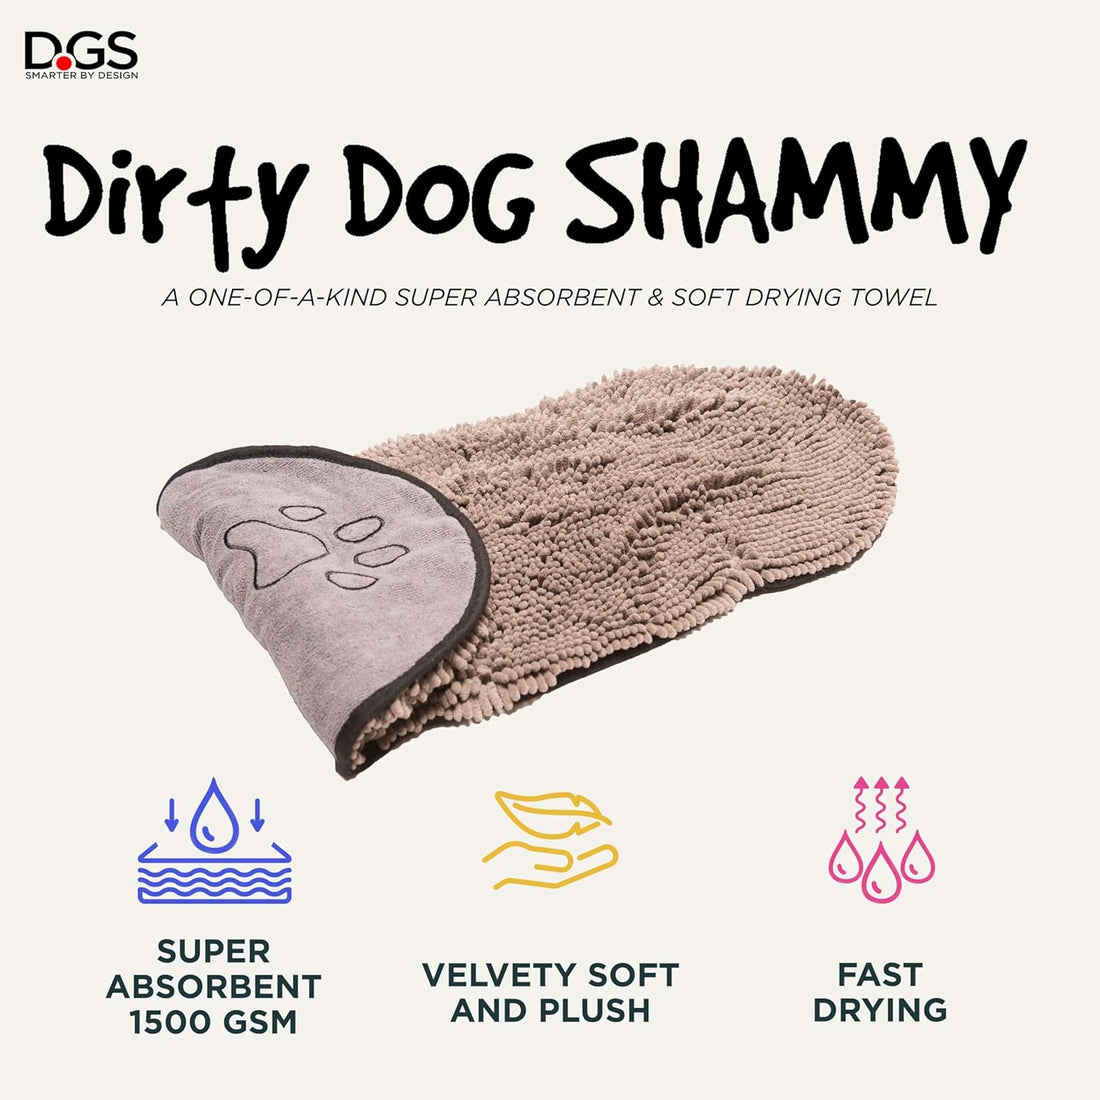 Shammy Dog Towels for Drying Dogs - Heavy Duty Soft Microfiber Bath Towel - Super Absorbent, Quick Drying, &amp; Machine Washable - Must Have Dog &amp; Cat Bathing Supplies | Grey 13X31